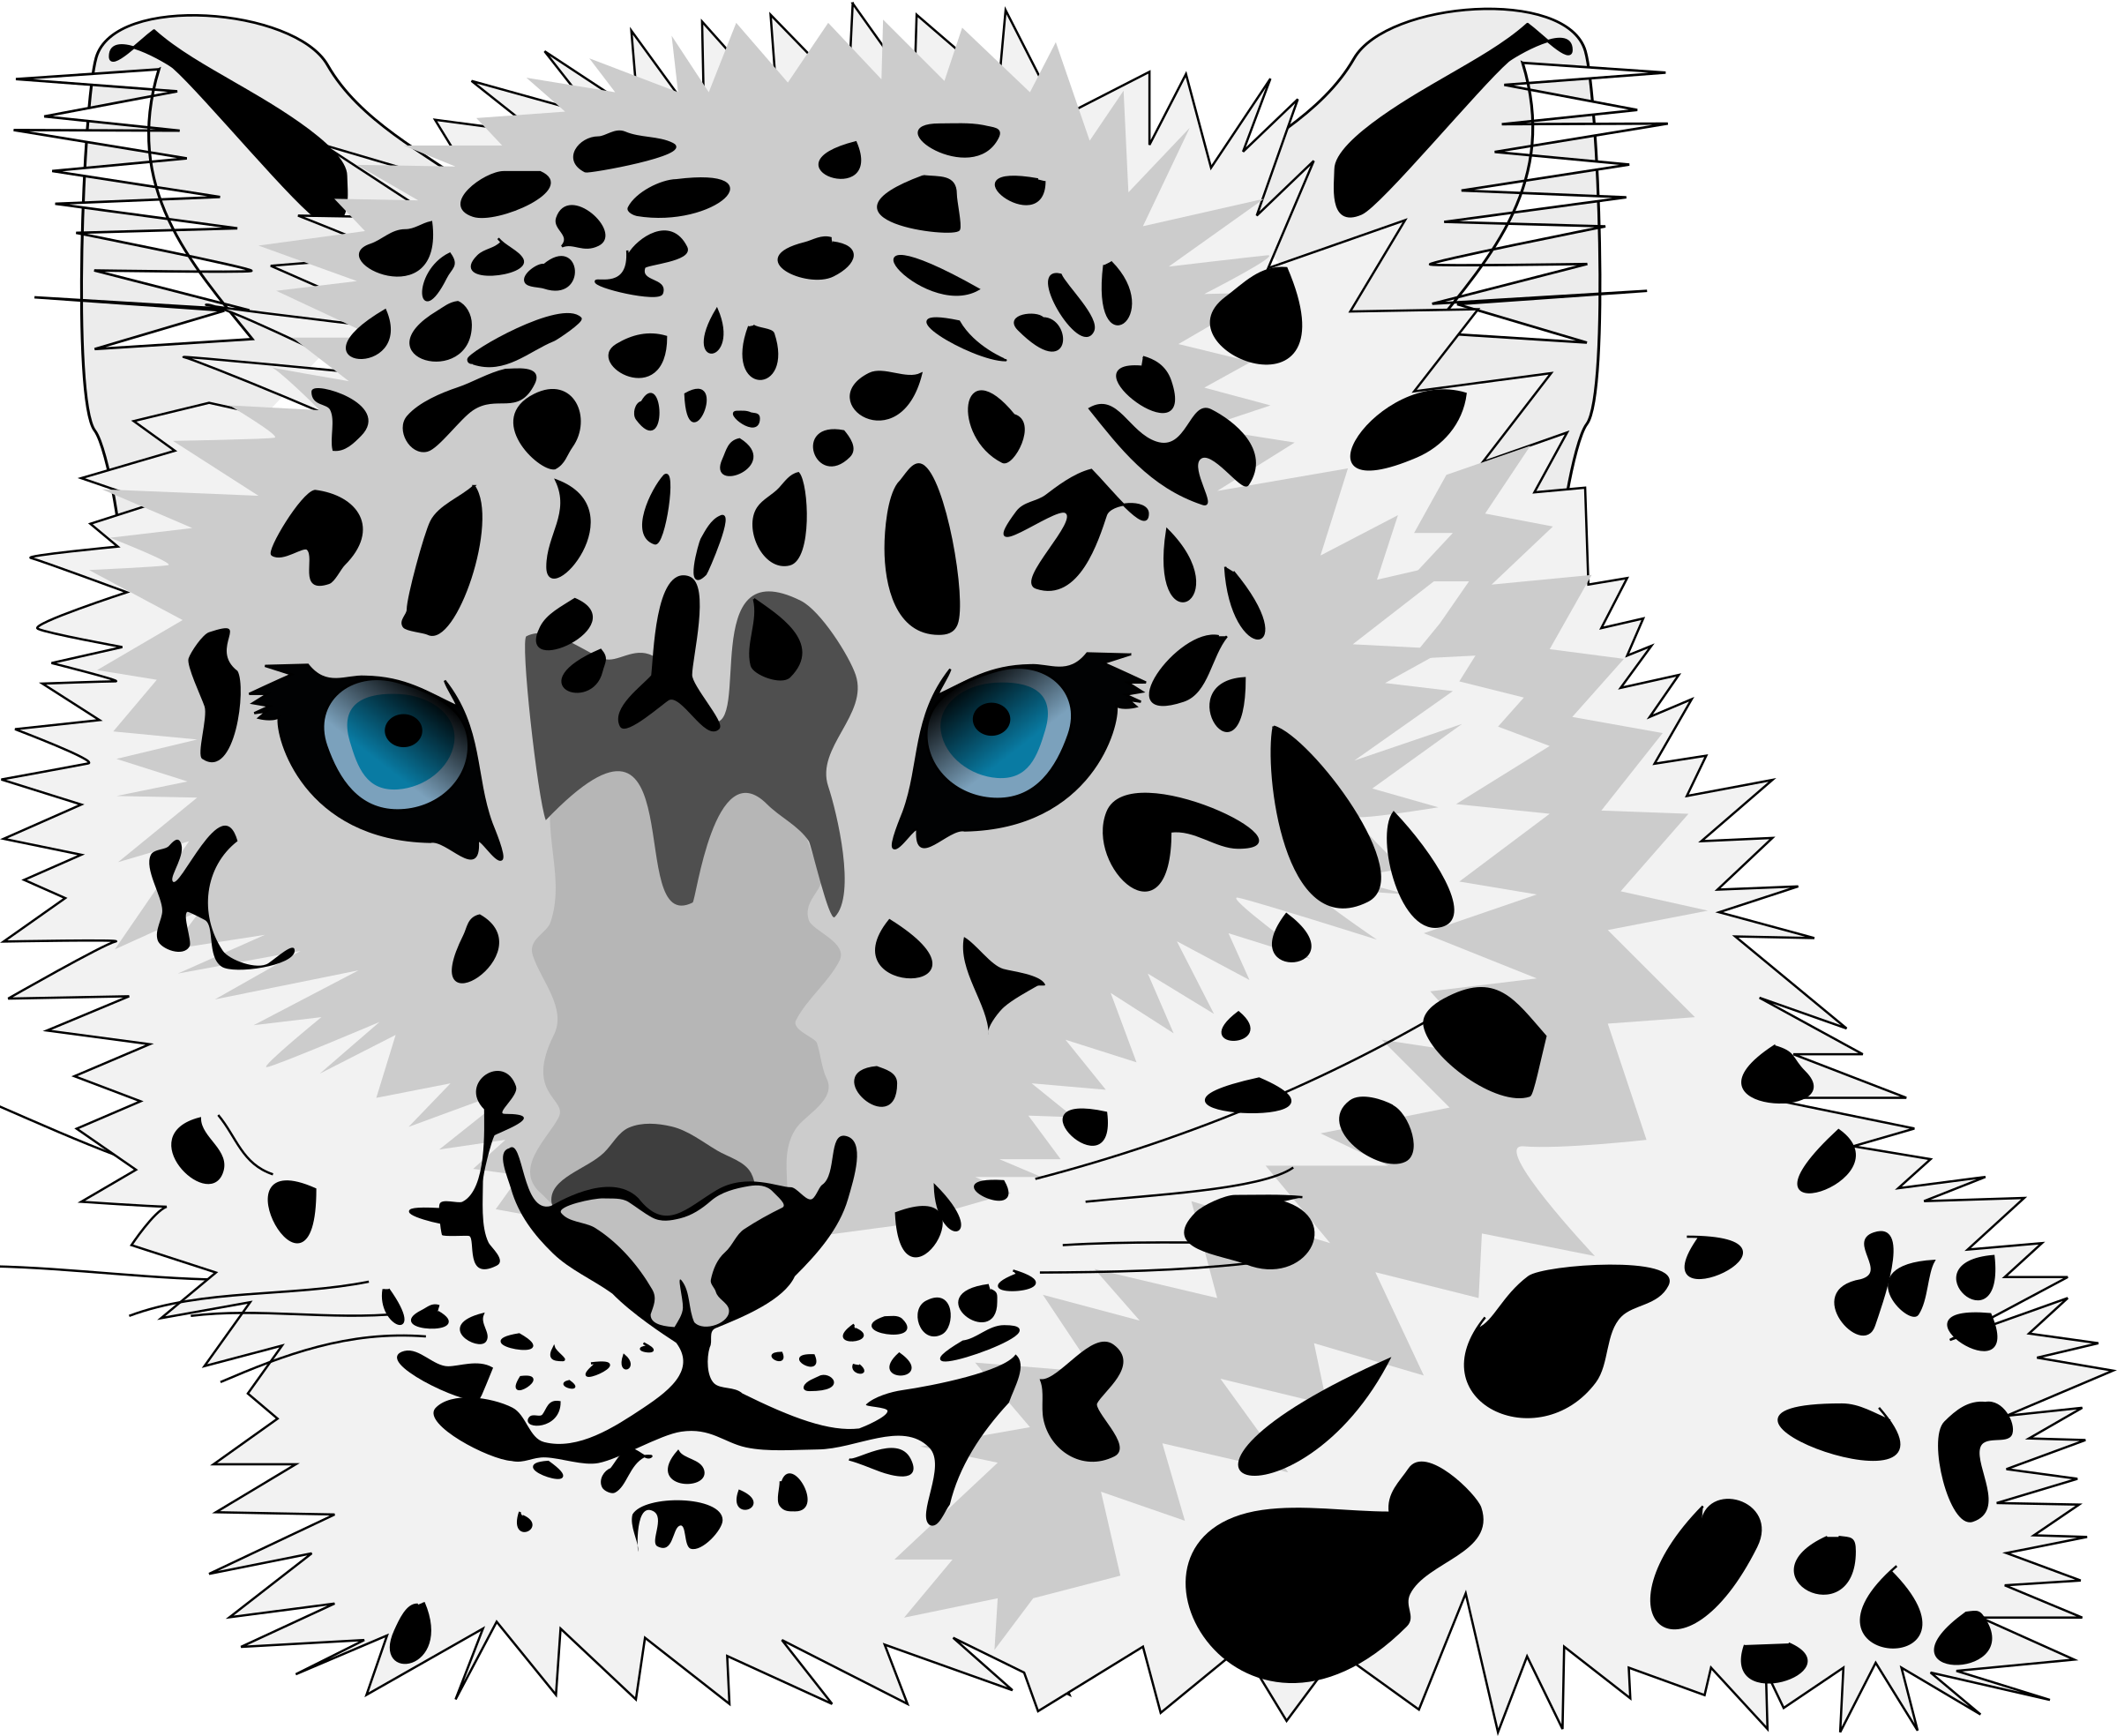 Download Snow Leopard Vector Graphic image - Free stock photo ...